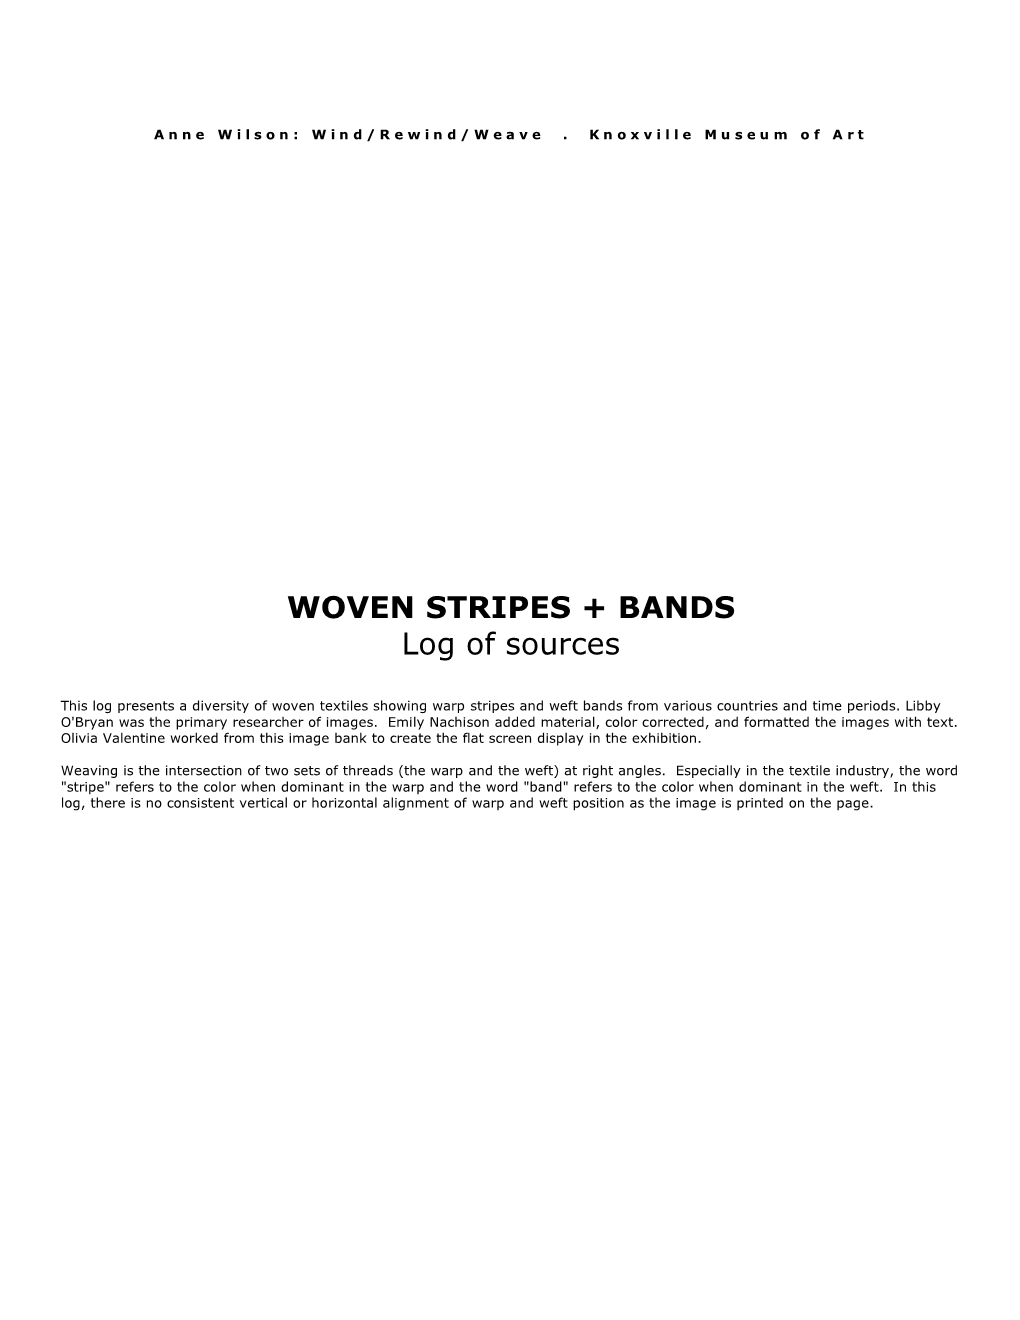 WOVEN STRIPES + BANDS Log of Sources